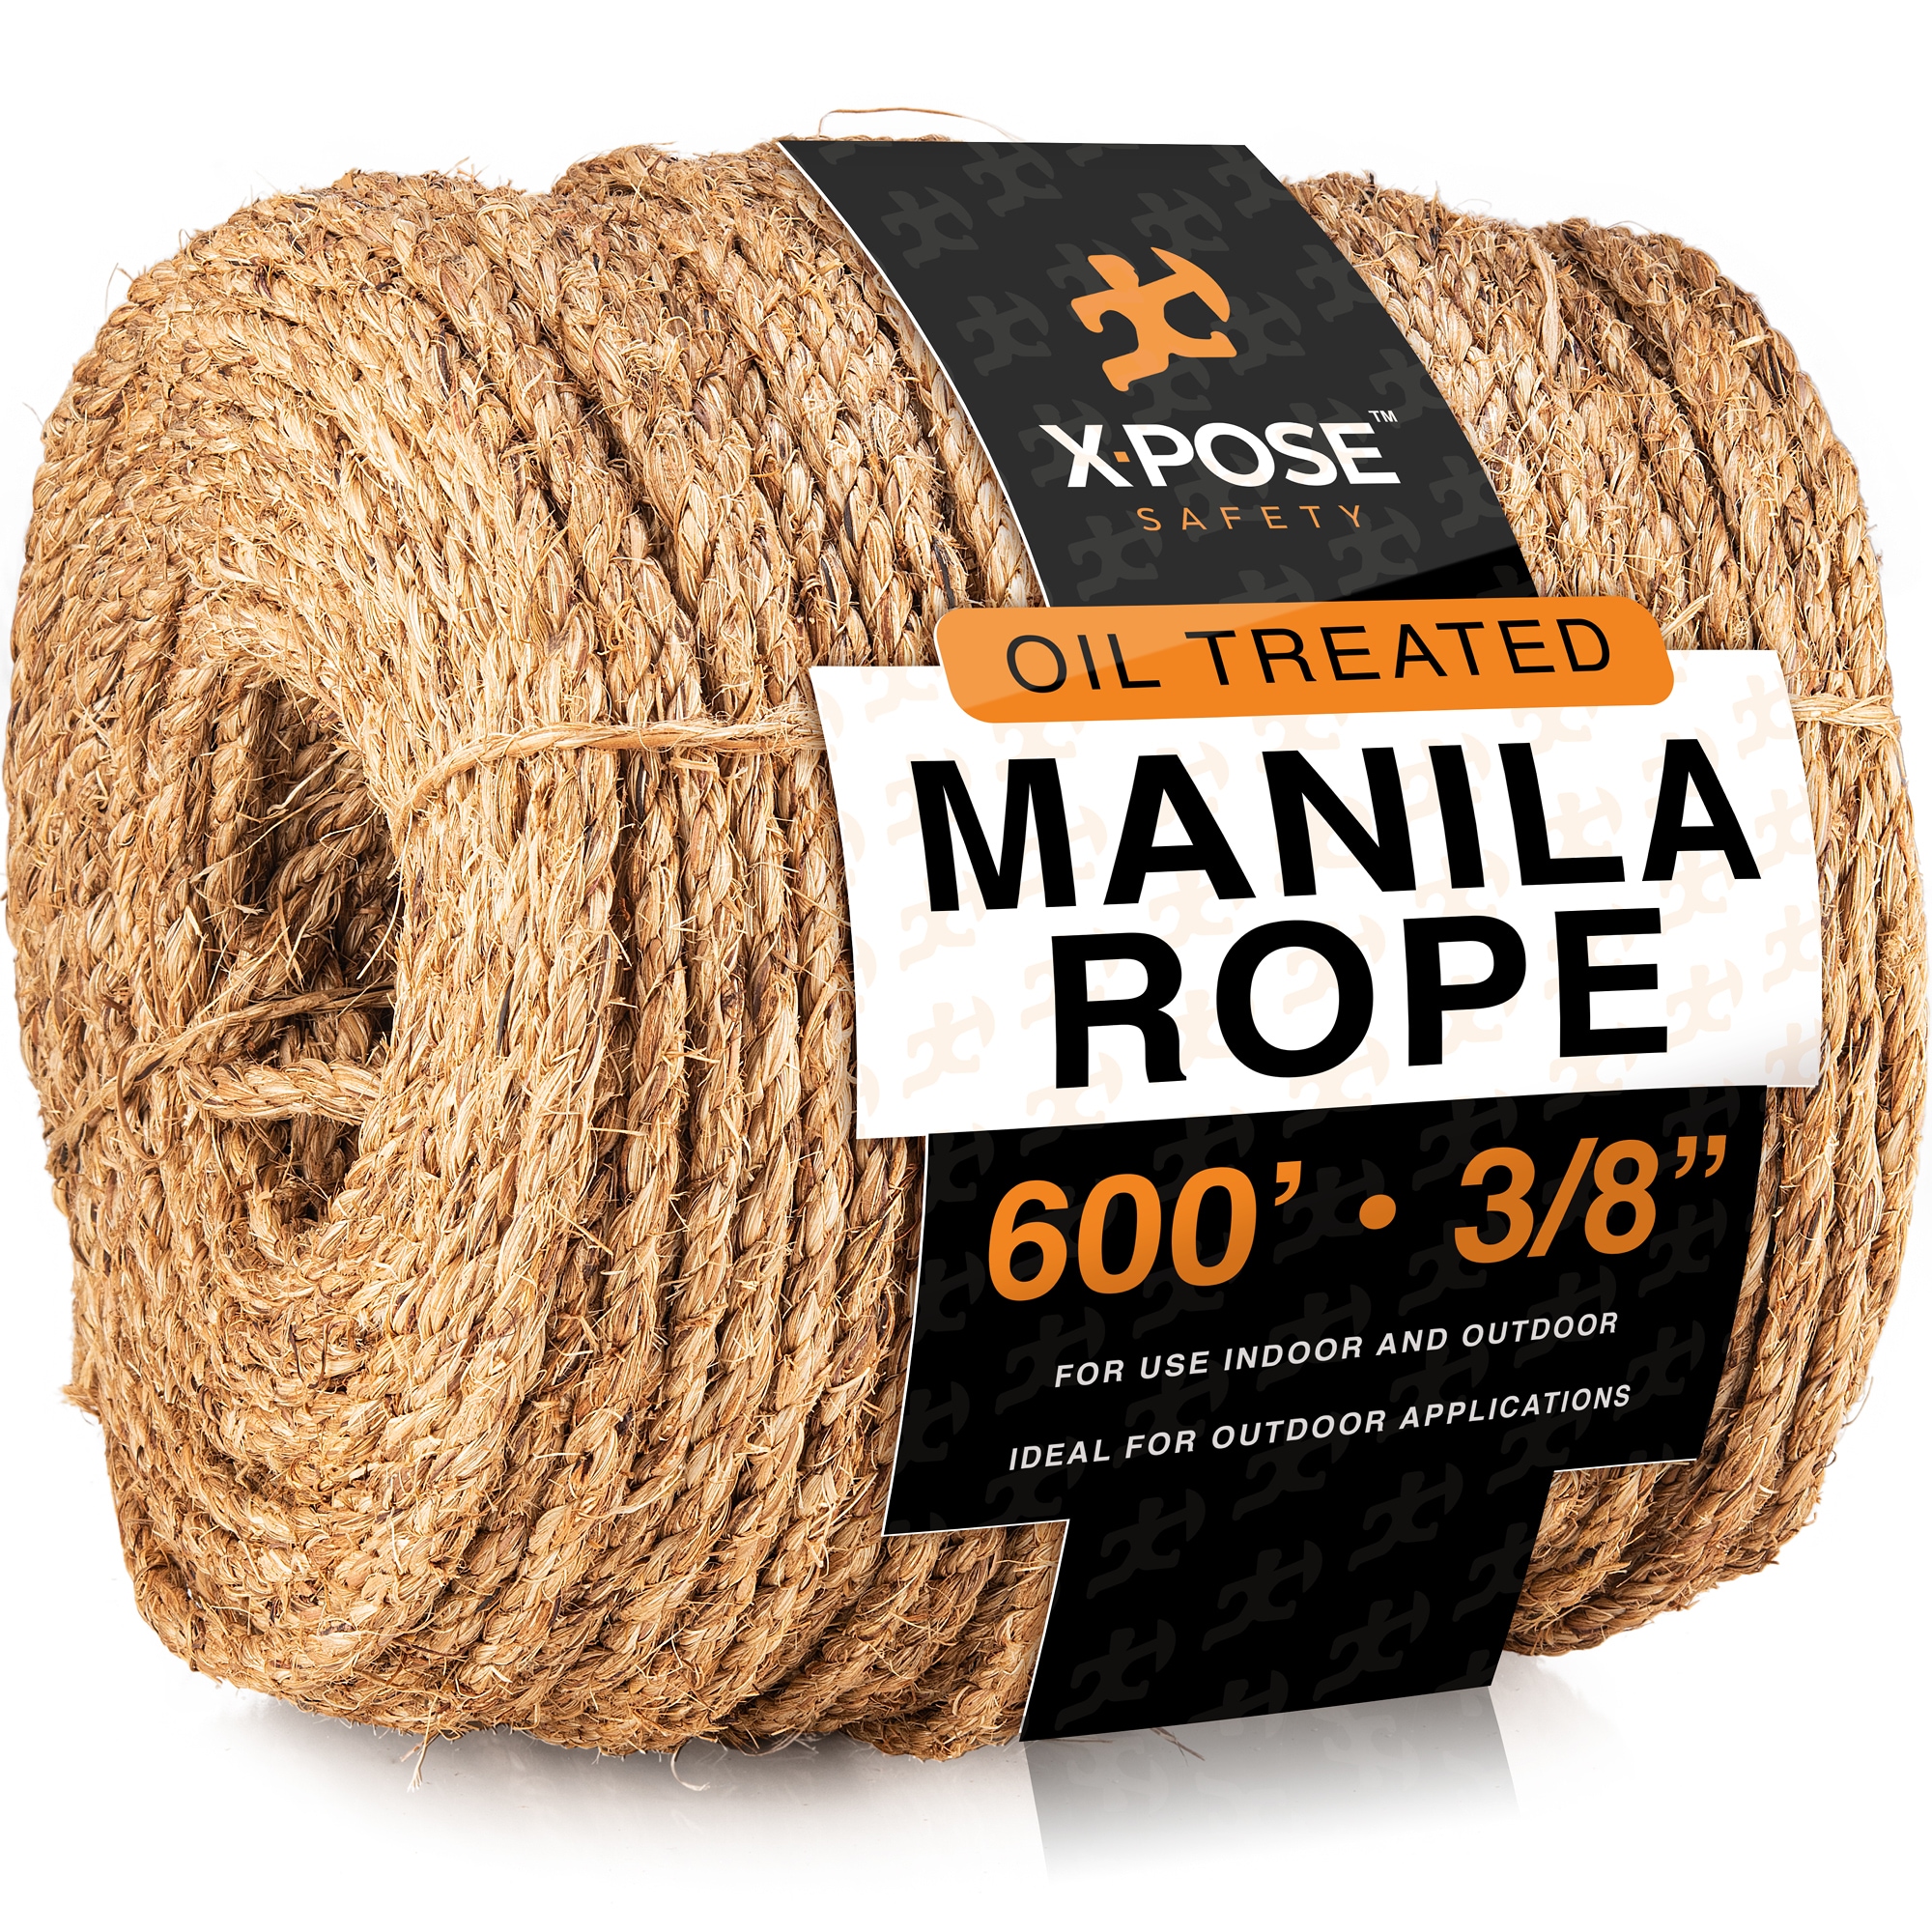 XPOSE SAFETY Manila Rope - 3/8 Inch Rope 600 Ft - 3 Strand Cordage Twisted  Braided Rope - Thick Natural Fiber Rope for, Marine, Decorative Rope for  Crafts, Porch Column, Outdoor Pole